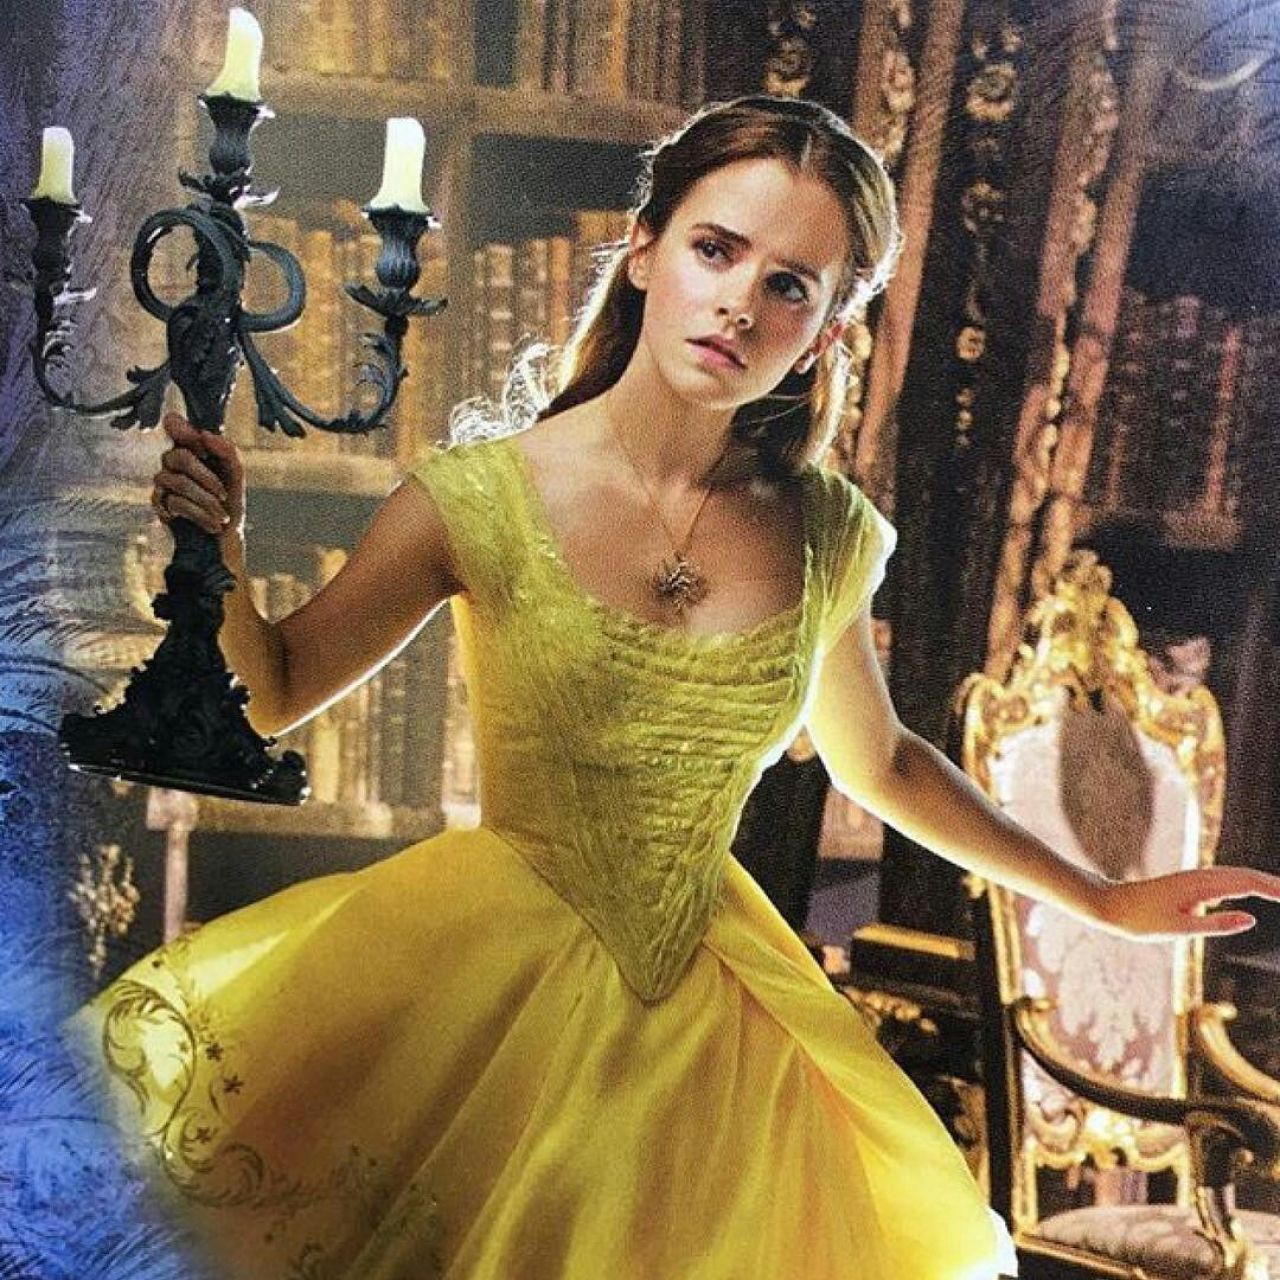 emma-watson-beauty-and-the-beast-2017-posters-promotional-photos-1